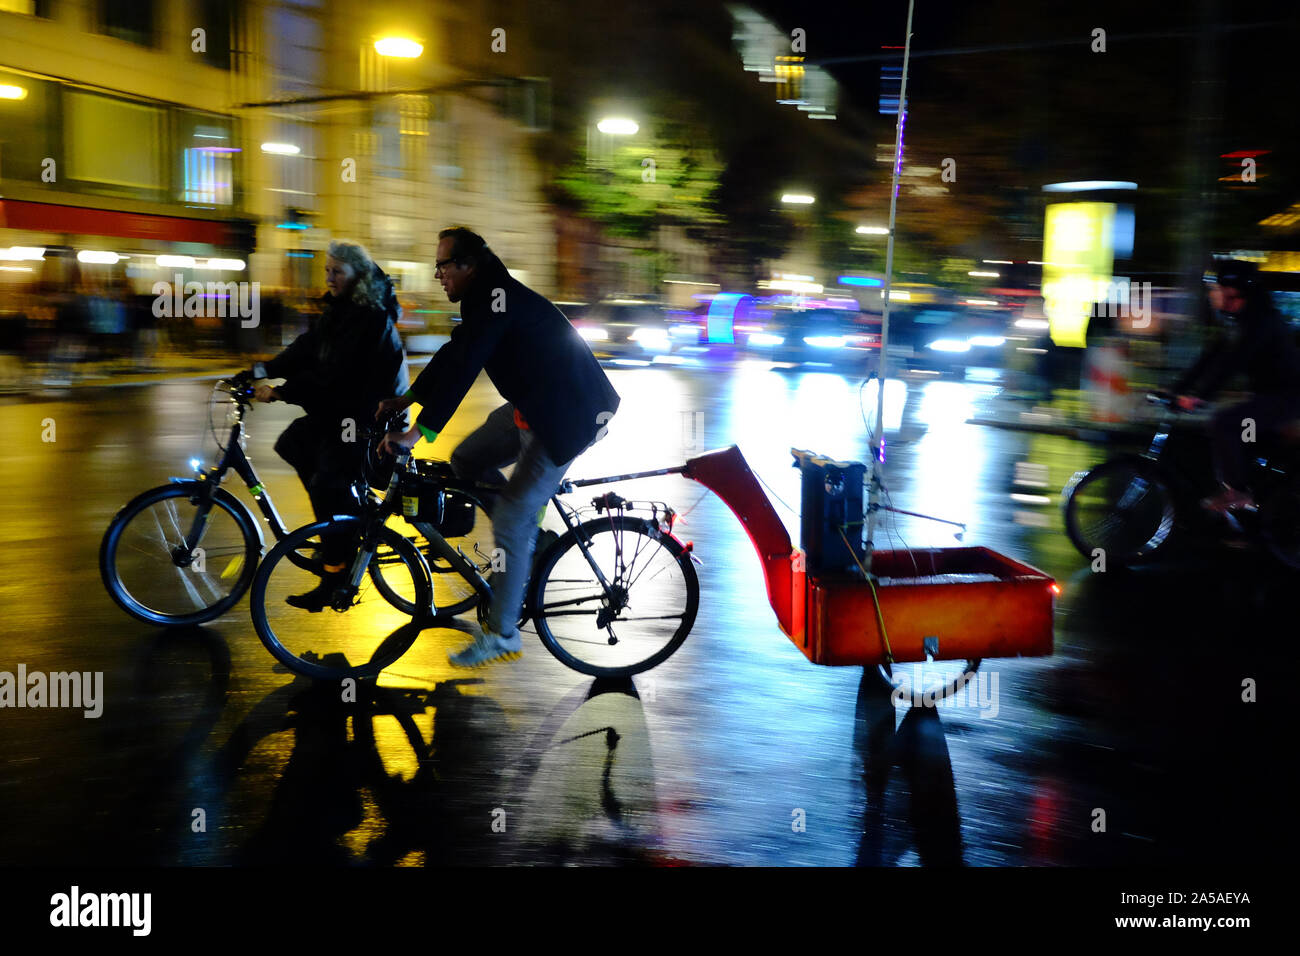 Berlin, Berlin, Germany. 18th Oct, 2019. Cyclists can be seen during the ADFC Light Ride (German: Lichterfahrt), a critical mass rally to protest for more road safety in city traffic for bicyclists.can be seen during the weekly Critical Mass Rally in central Berlin. Credit: Jan Scheunert/ZUMA Wire/Alamy Live News Stock Photo